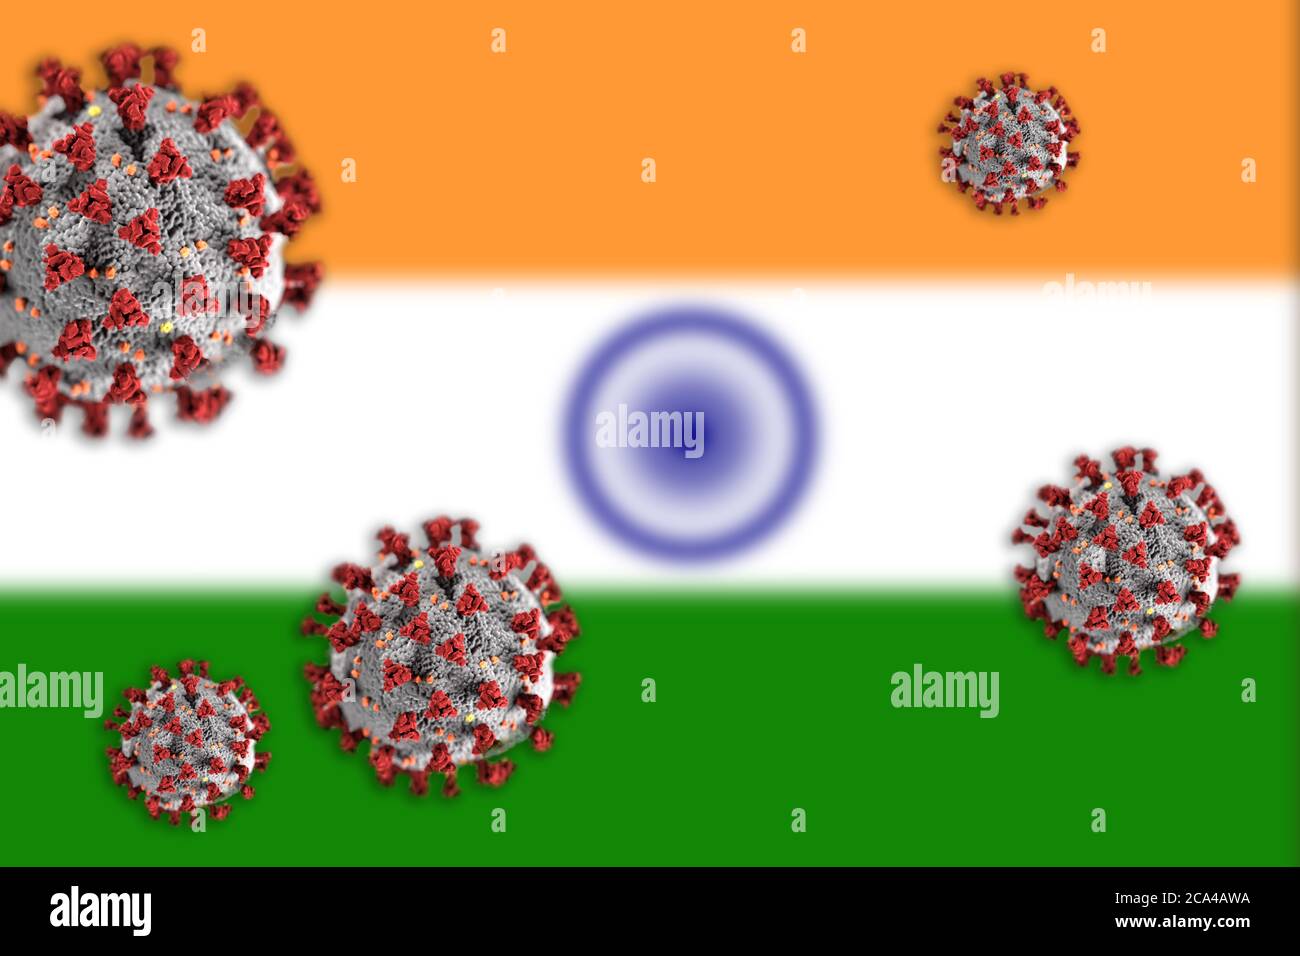 Concept of Coronavirus or Covid-19 particles overshadowing blurred flag of India in background. Stock Photo